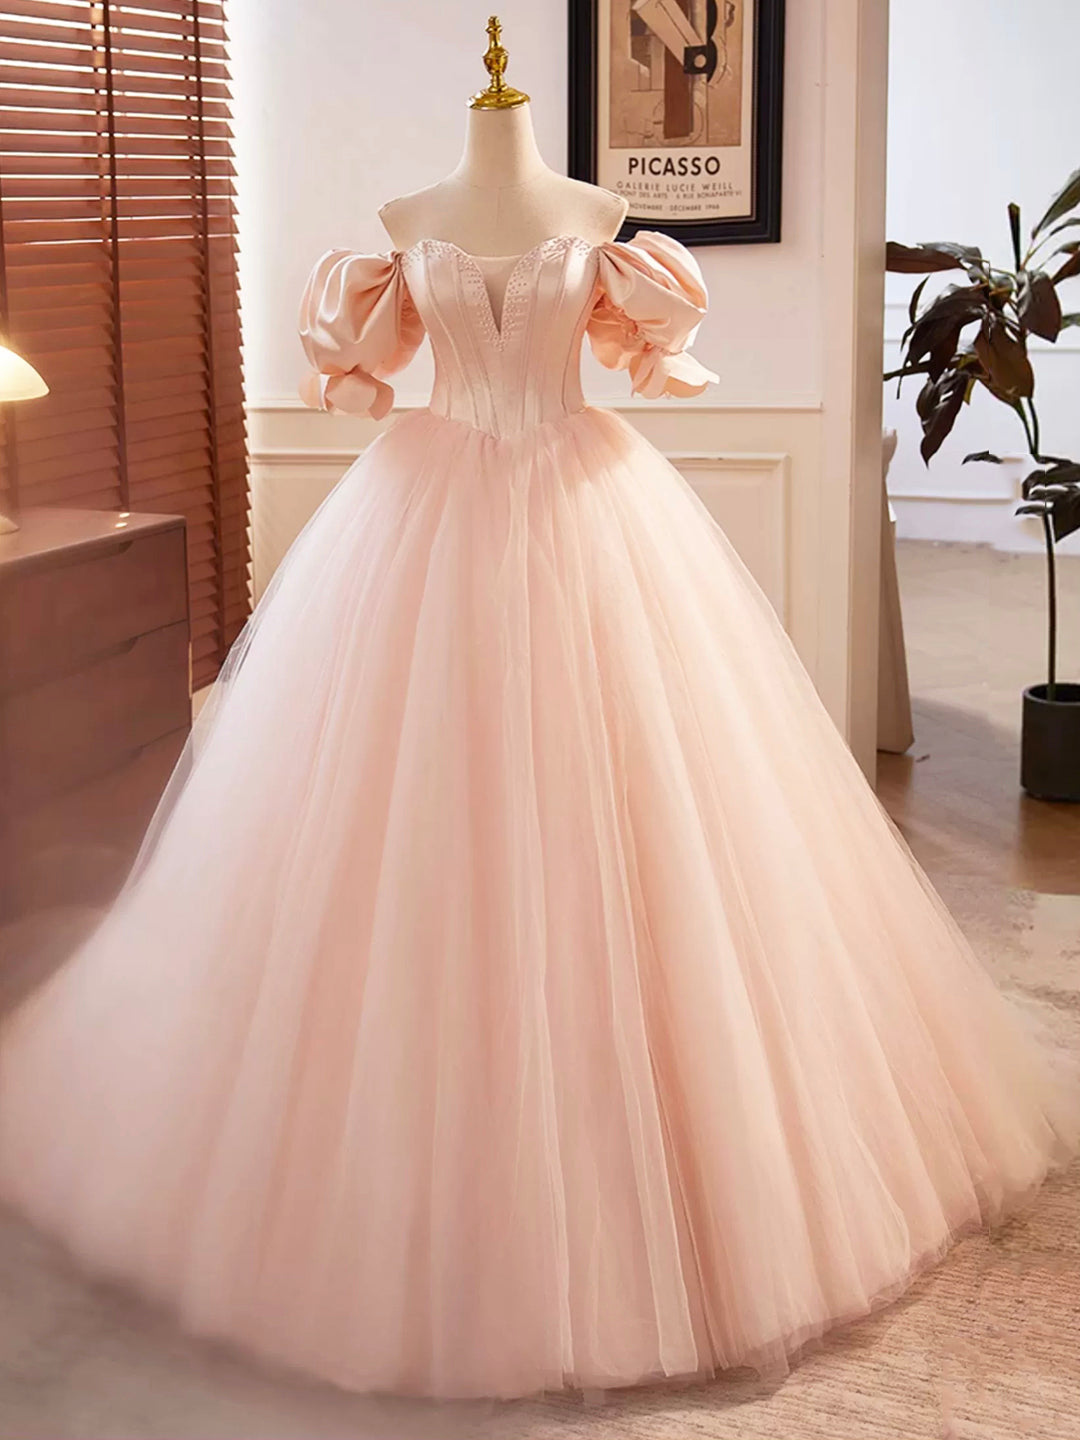 Pink Sweetheart Neck Corset Tulle Corset Prom Dress, A-Line Off the Shoulder Sweet 16 Dress outfit, Bridesmaid Dress Designs